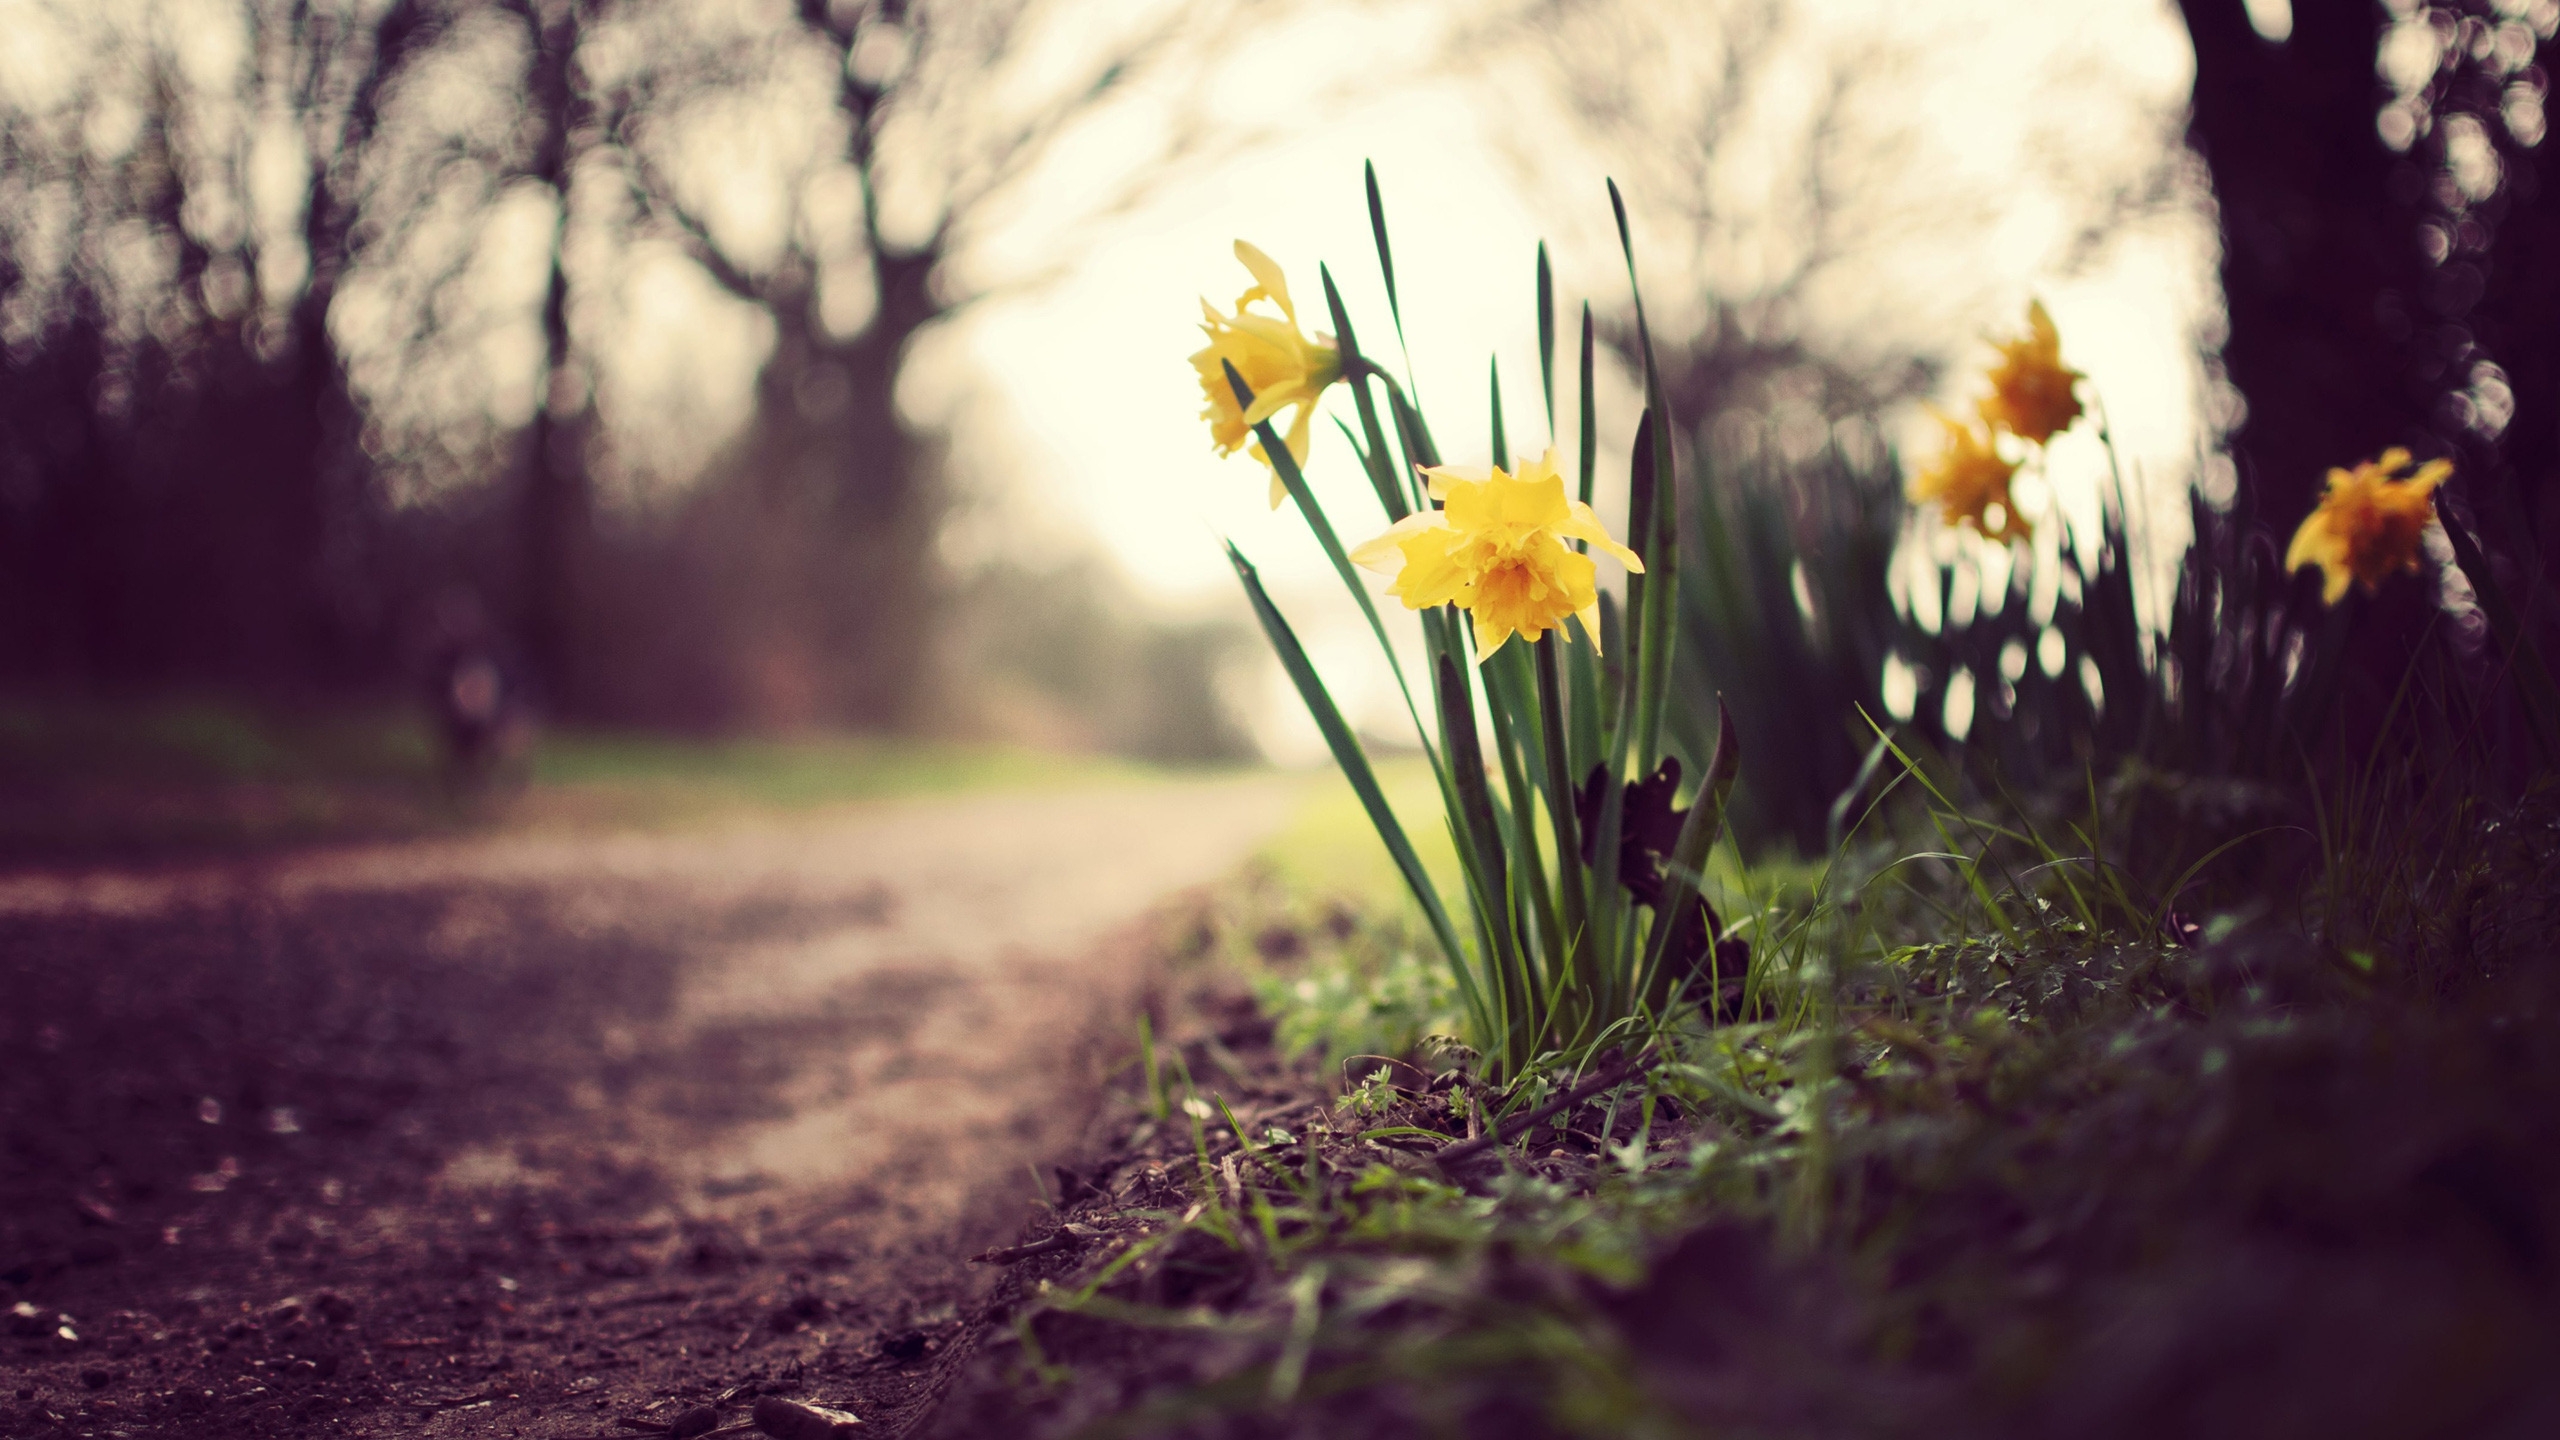 Daffodils on the Road for 2560x1440 HDTV resolution